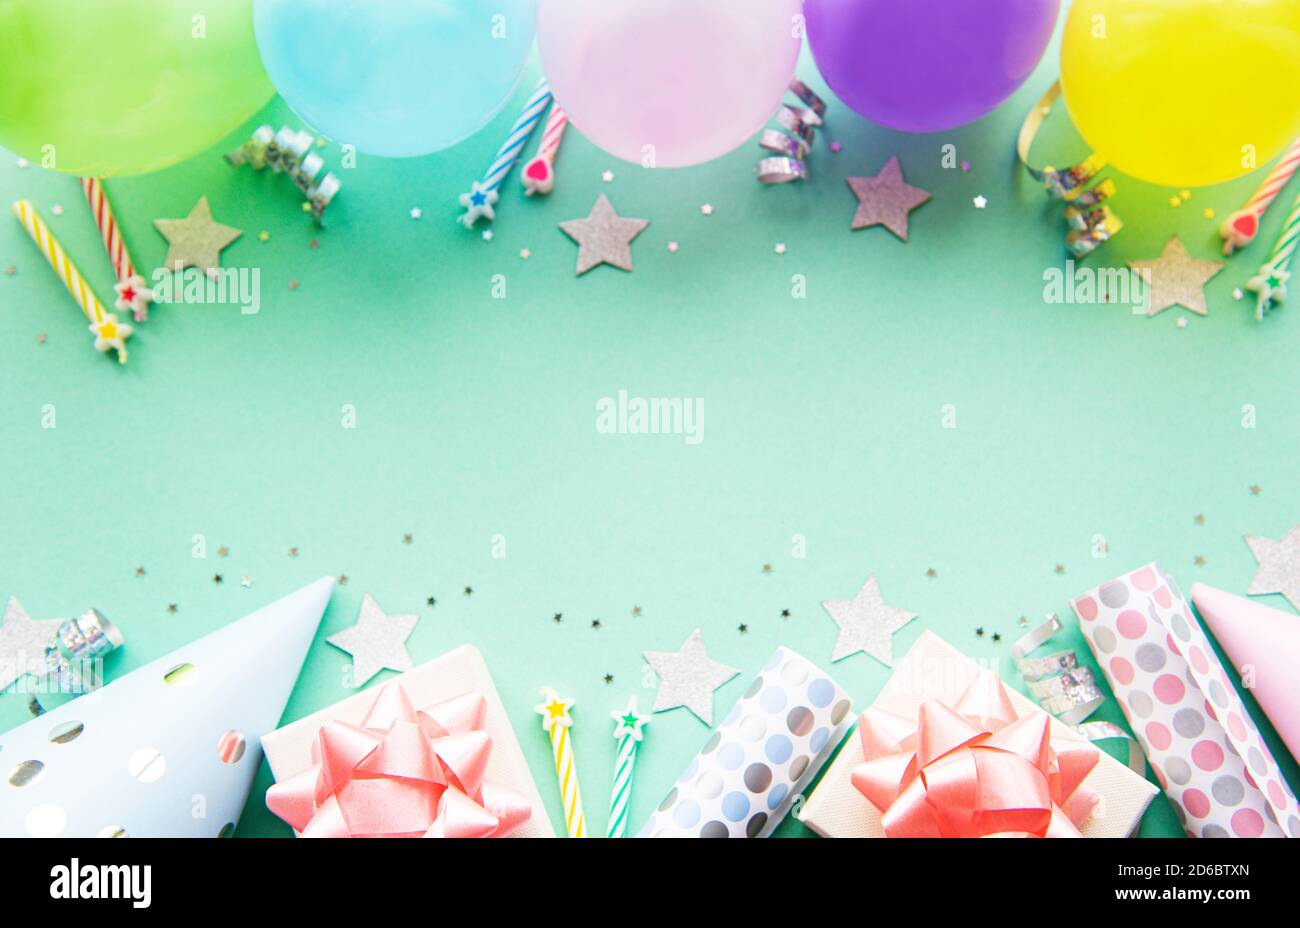 balloons and confetti wallpaper